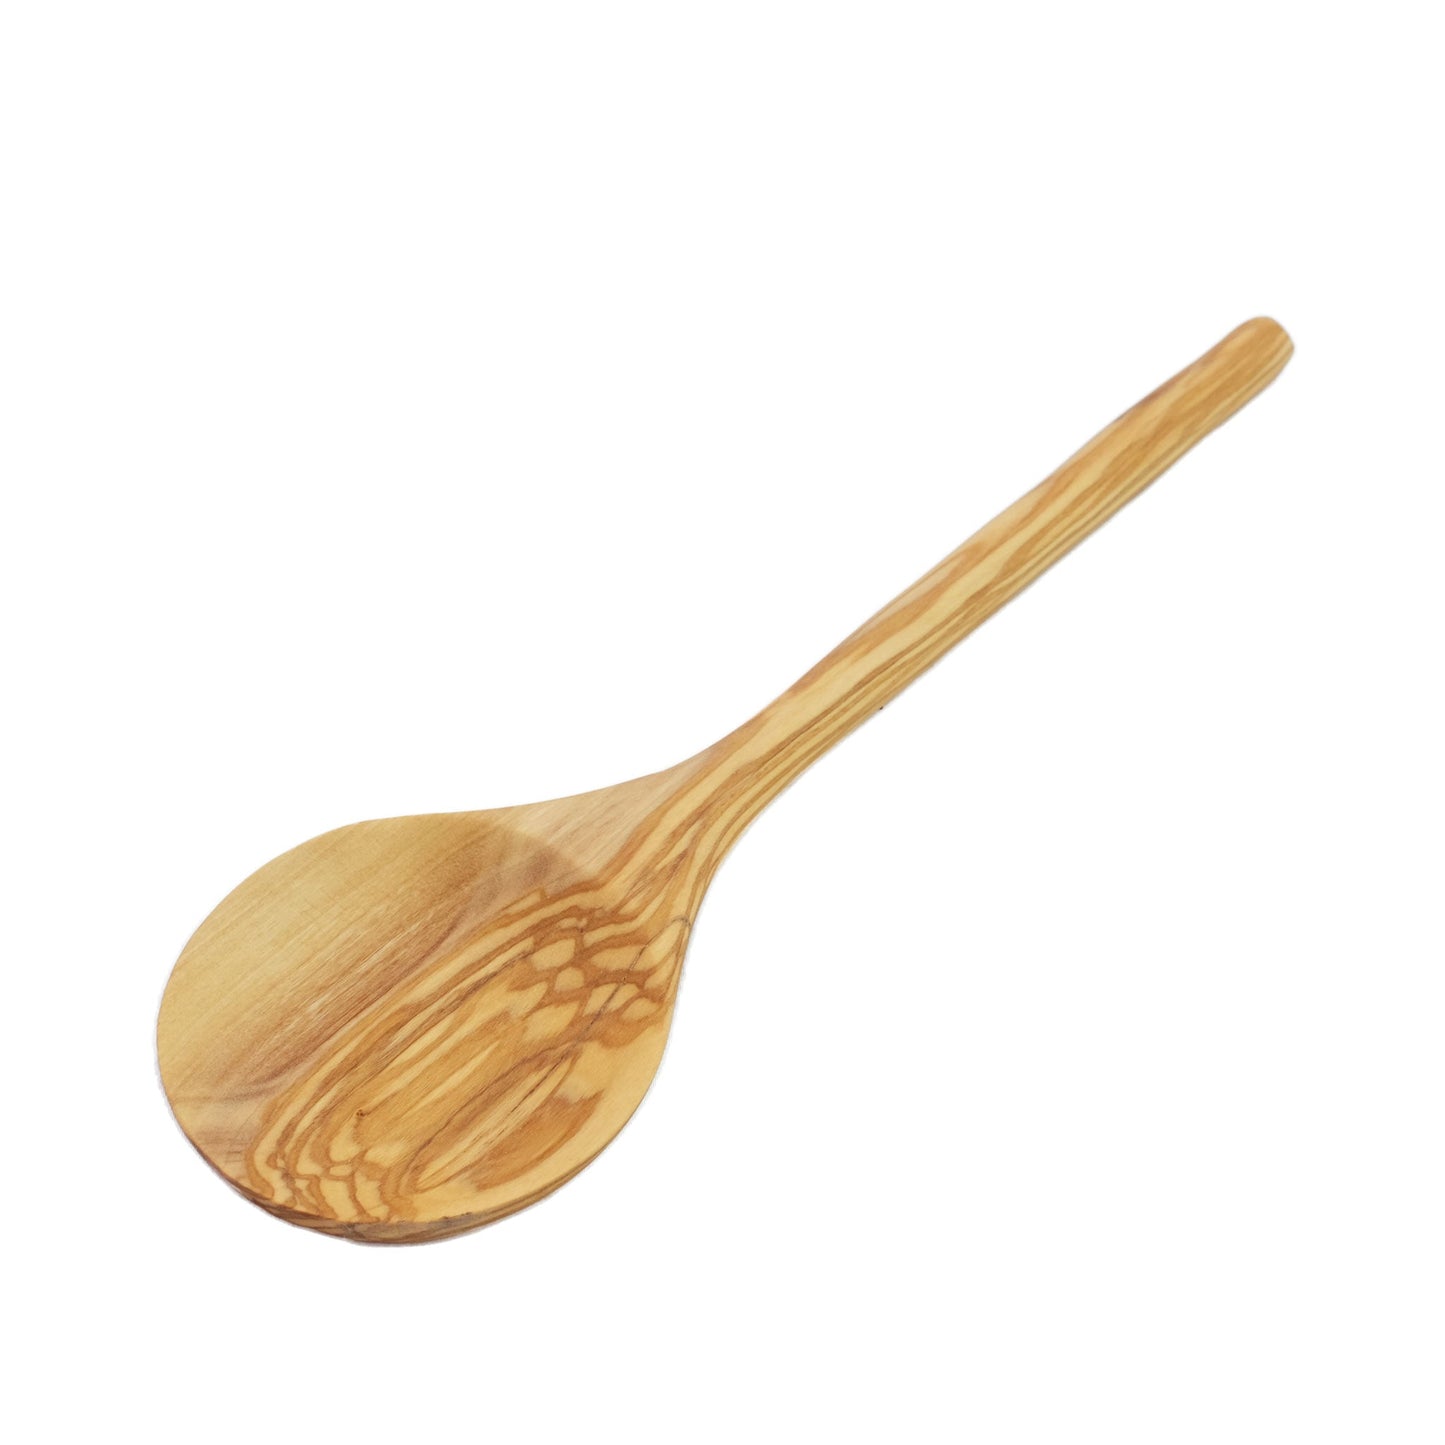 Handmade and ethically made olive wood serving spoon made in Tunisia. Each olive wood piece has a unique luster from the natural grain of the wood, easily maintained with food safe oil.